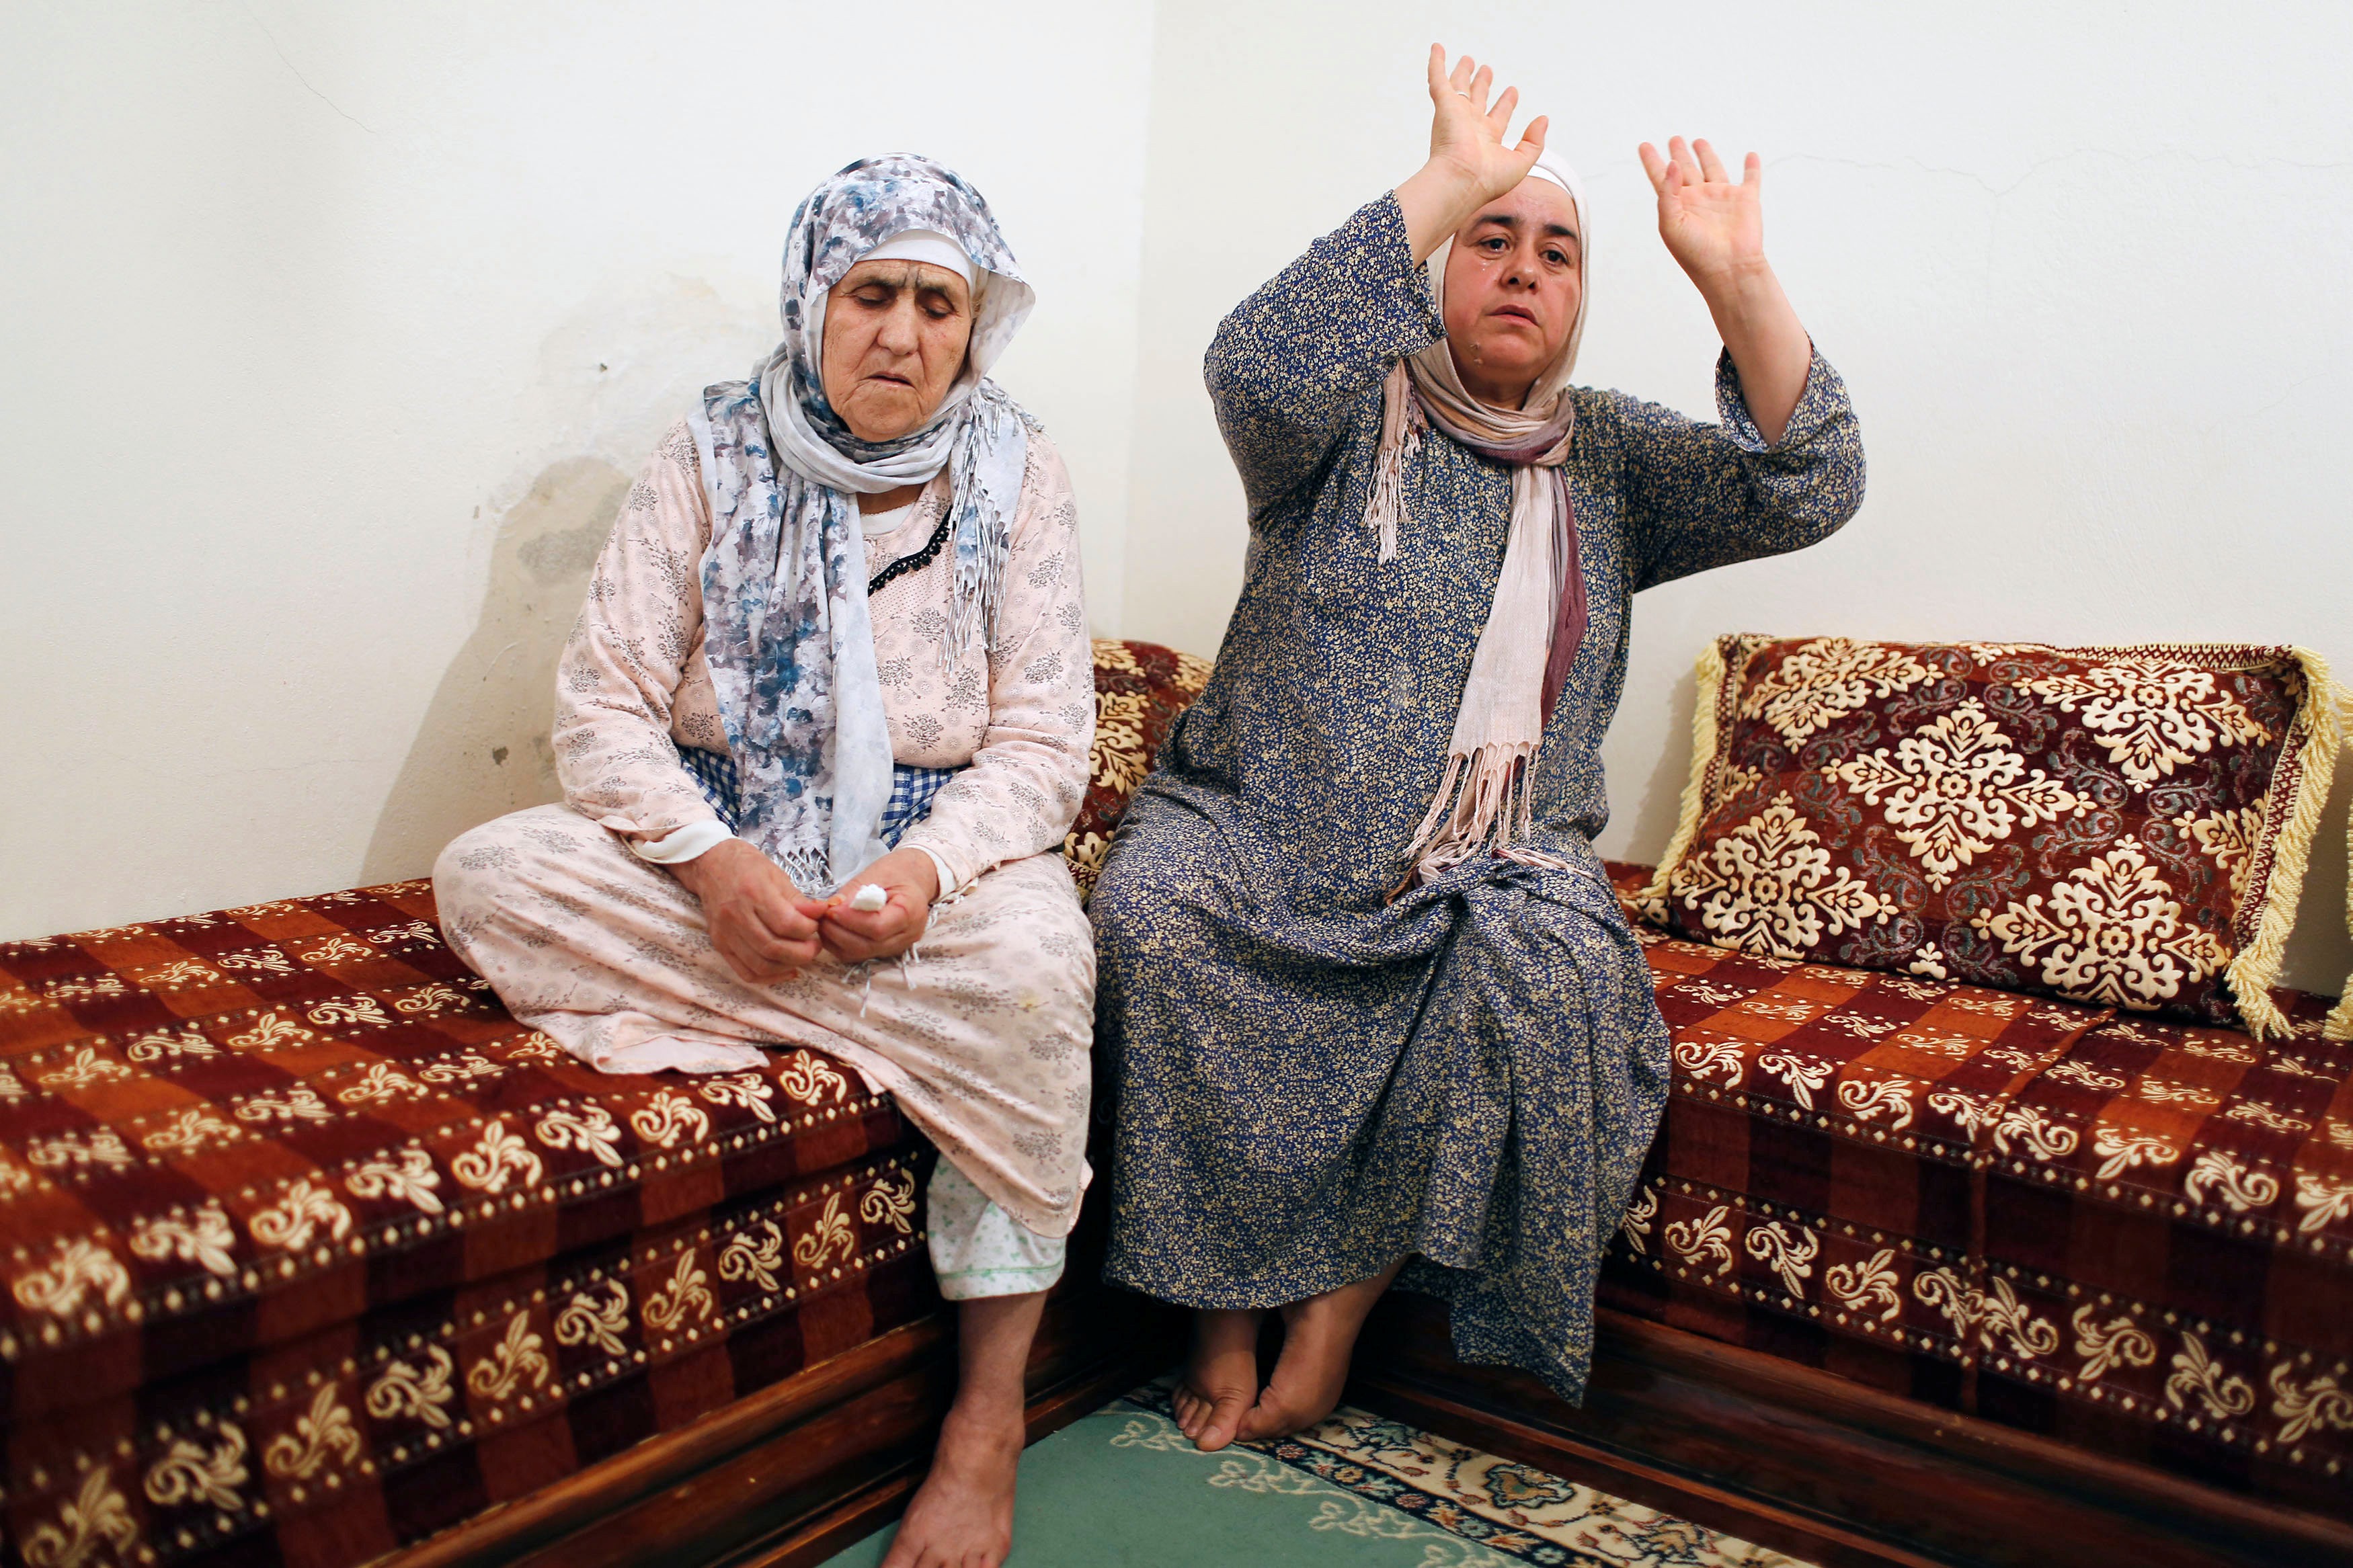 Chrifa Hychami (left), grandmother of Spain terror suspects Mohammed and Omar Hychami - both of whom were shot dead by police - sits with Fatima Abouyaaqoub, aunt of suspects Younes and Houssaine Abouyaaqoub, in their family home in Mrirt, Morocco, on Sunday. Houssaine Abouyaaqoub was also shot dead, while Younes Abouyaaqoub is the subject of a massive manhunt. Photo: Reuters